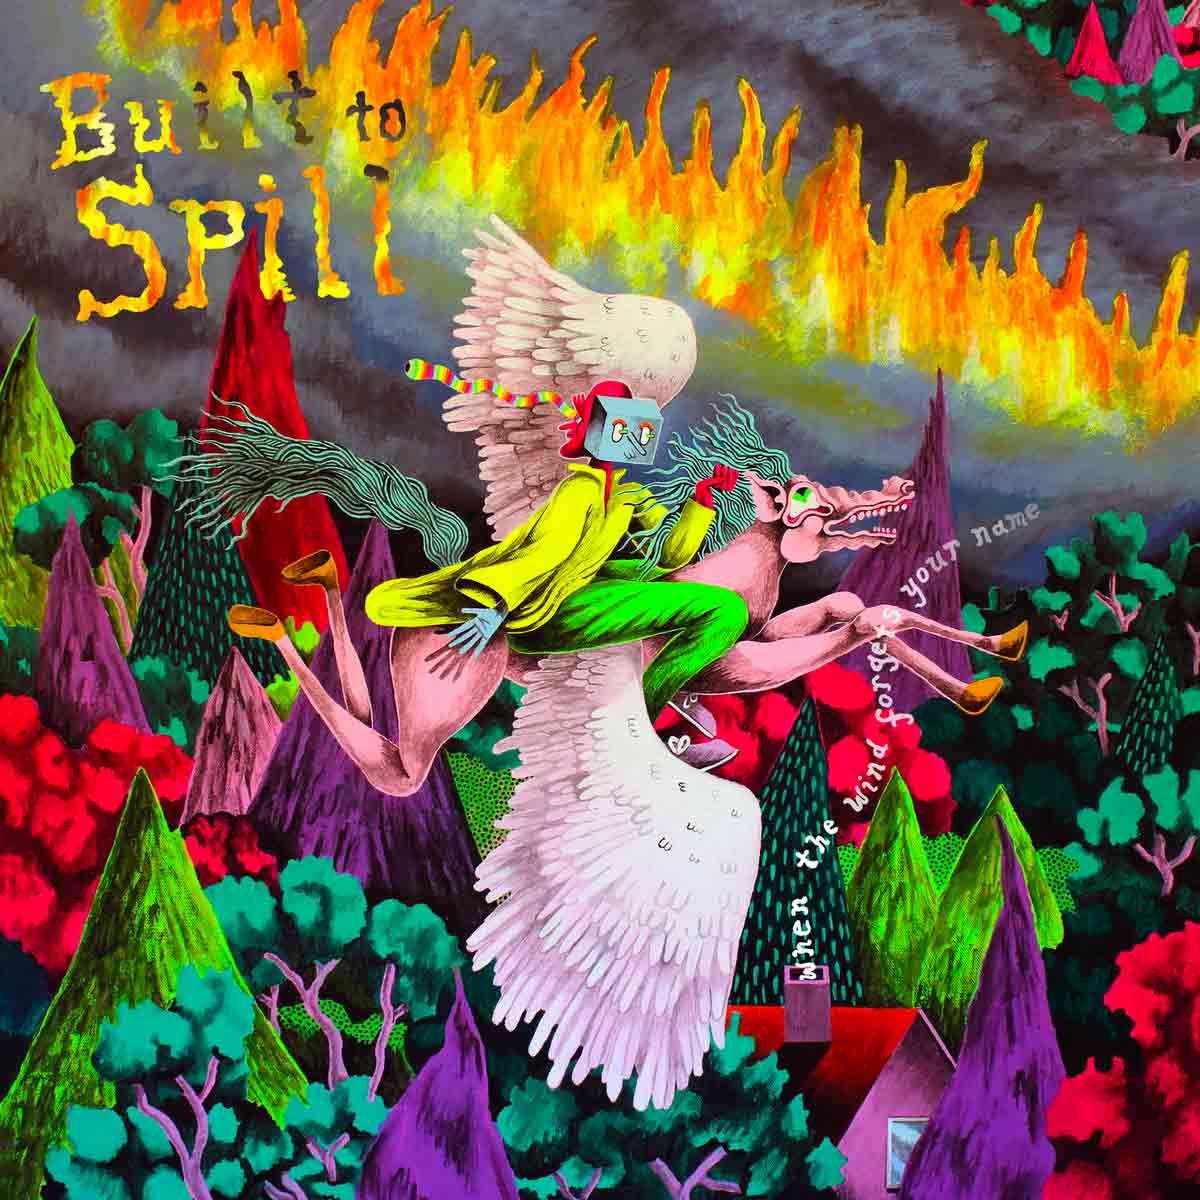 Tapa de When the Wind Forgets Your Name, disco de Built to Spill